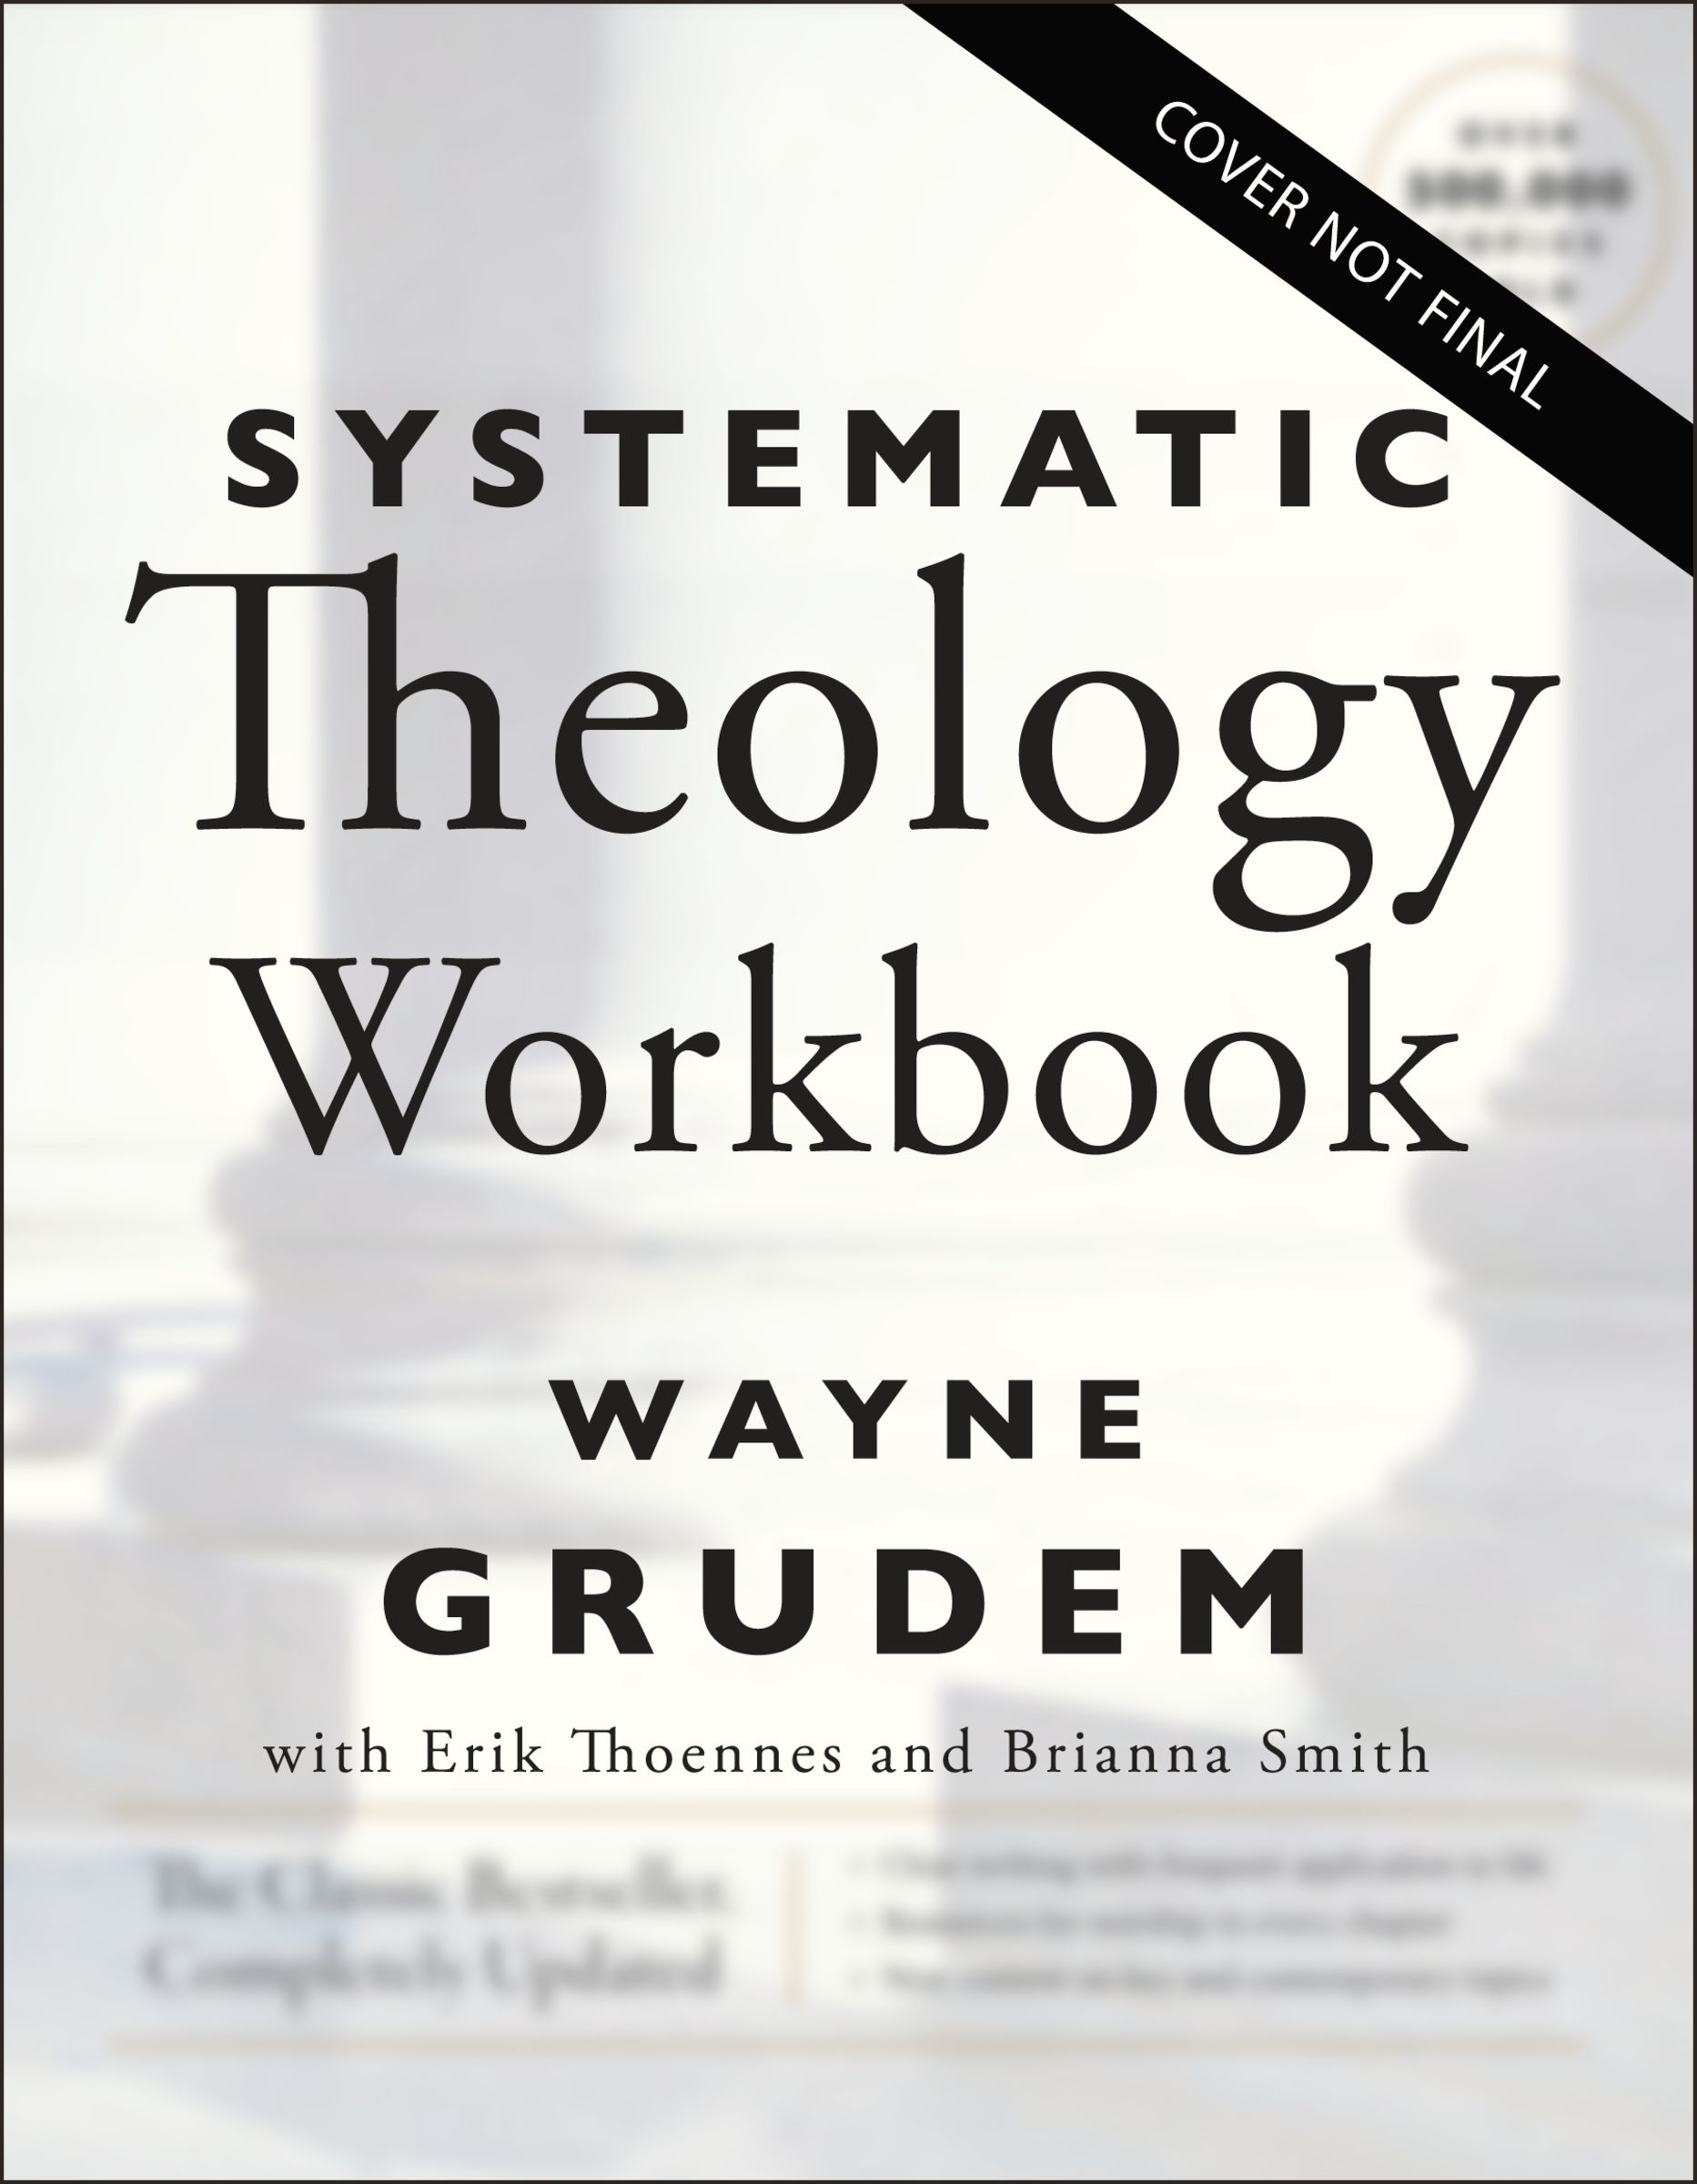 systematic theology research paper topics